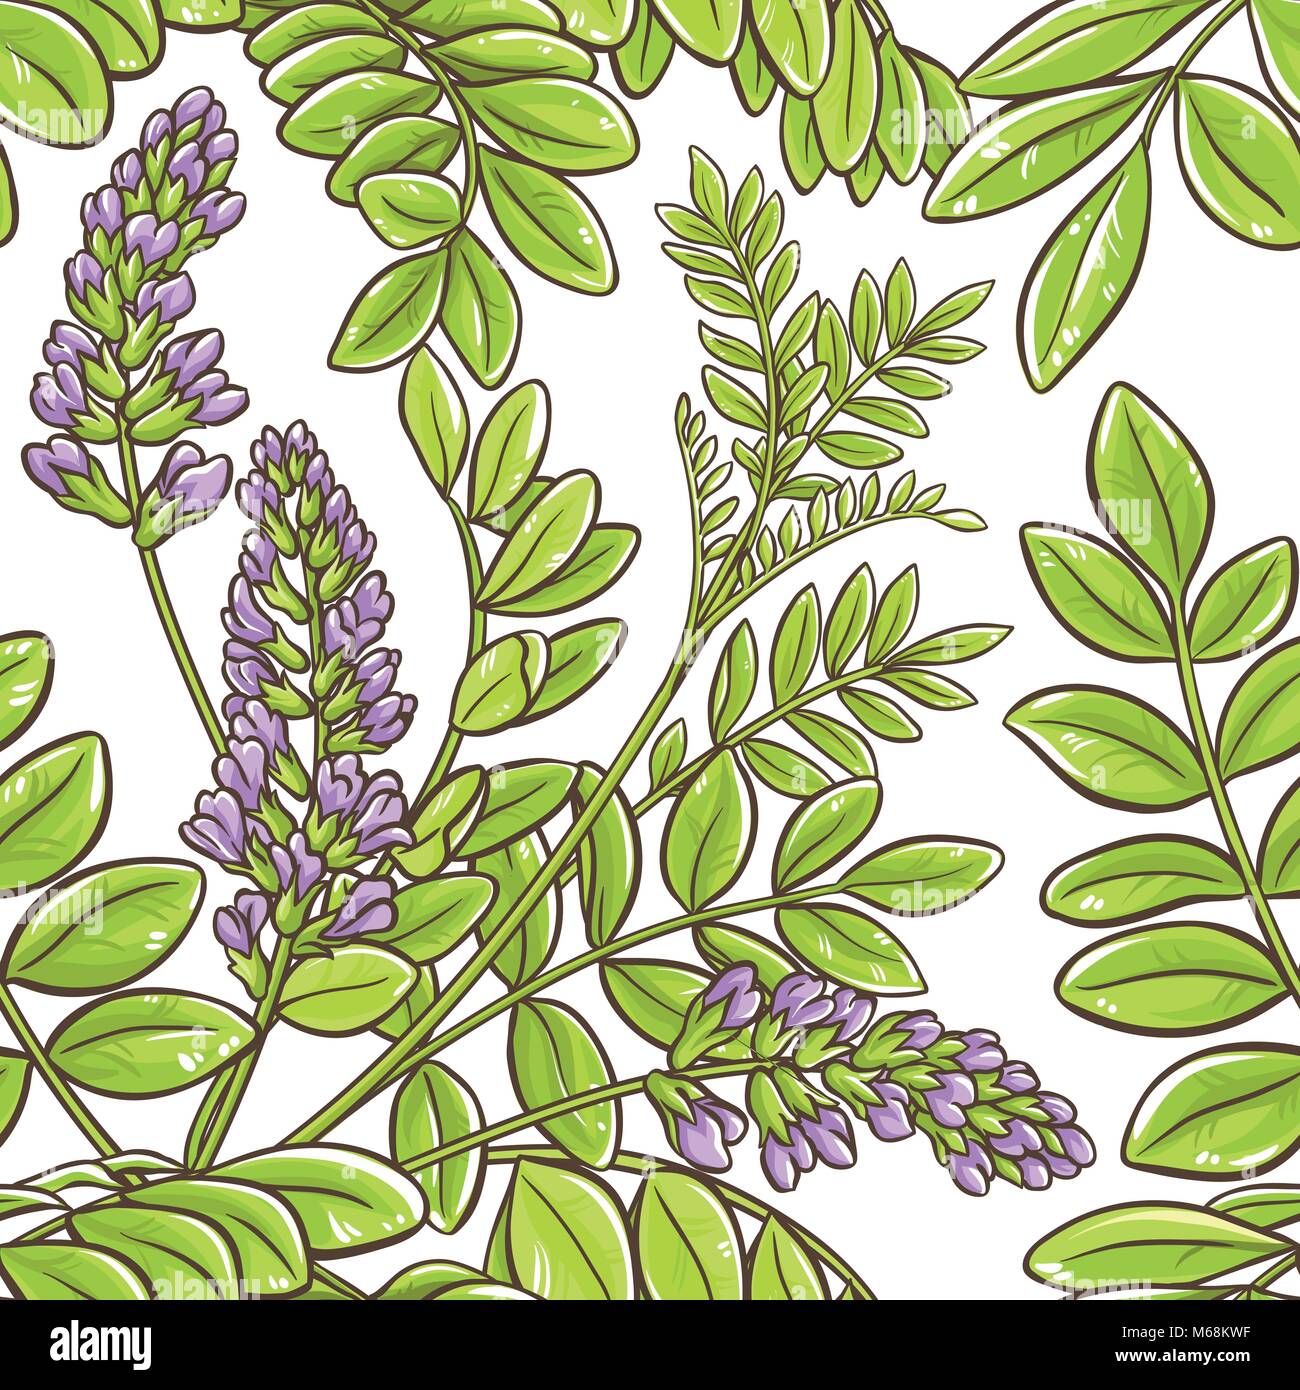 licorice plant vector pattern on white background Stock Vector